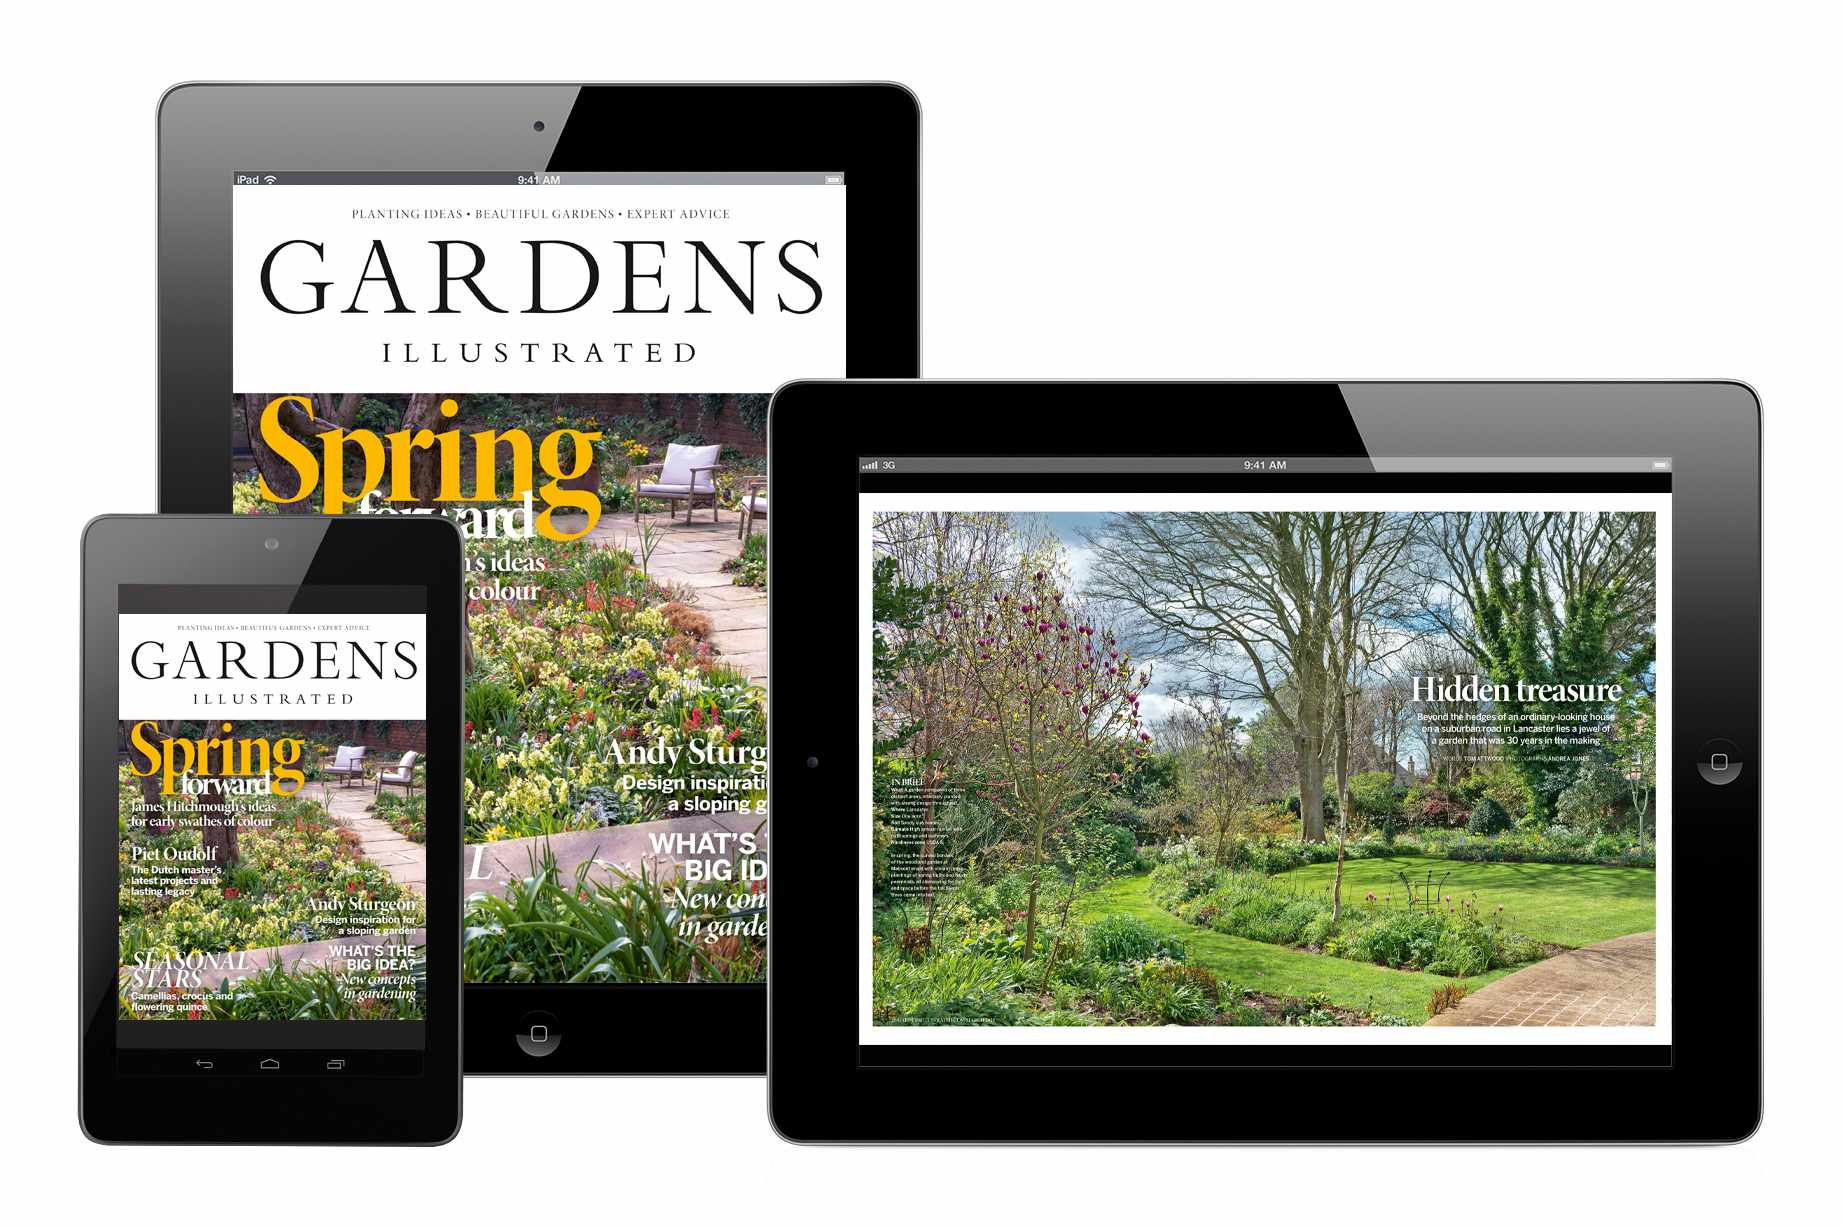 March's Gardens Illustrated